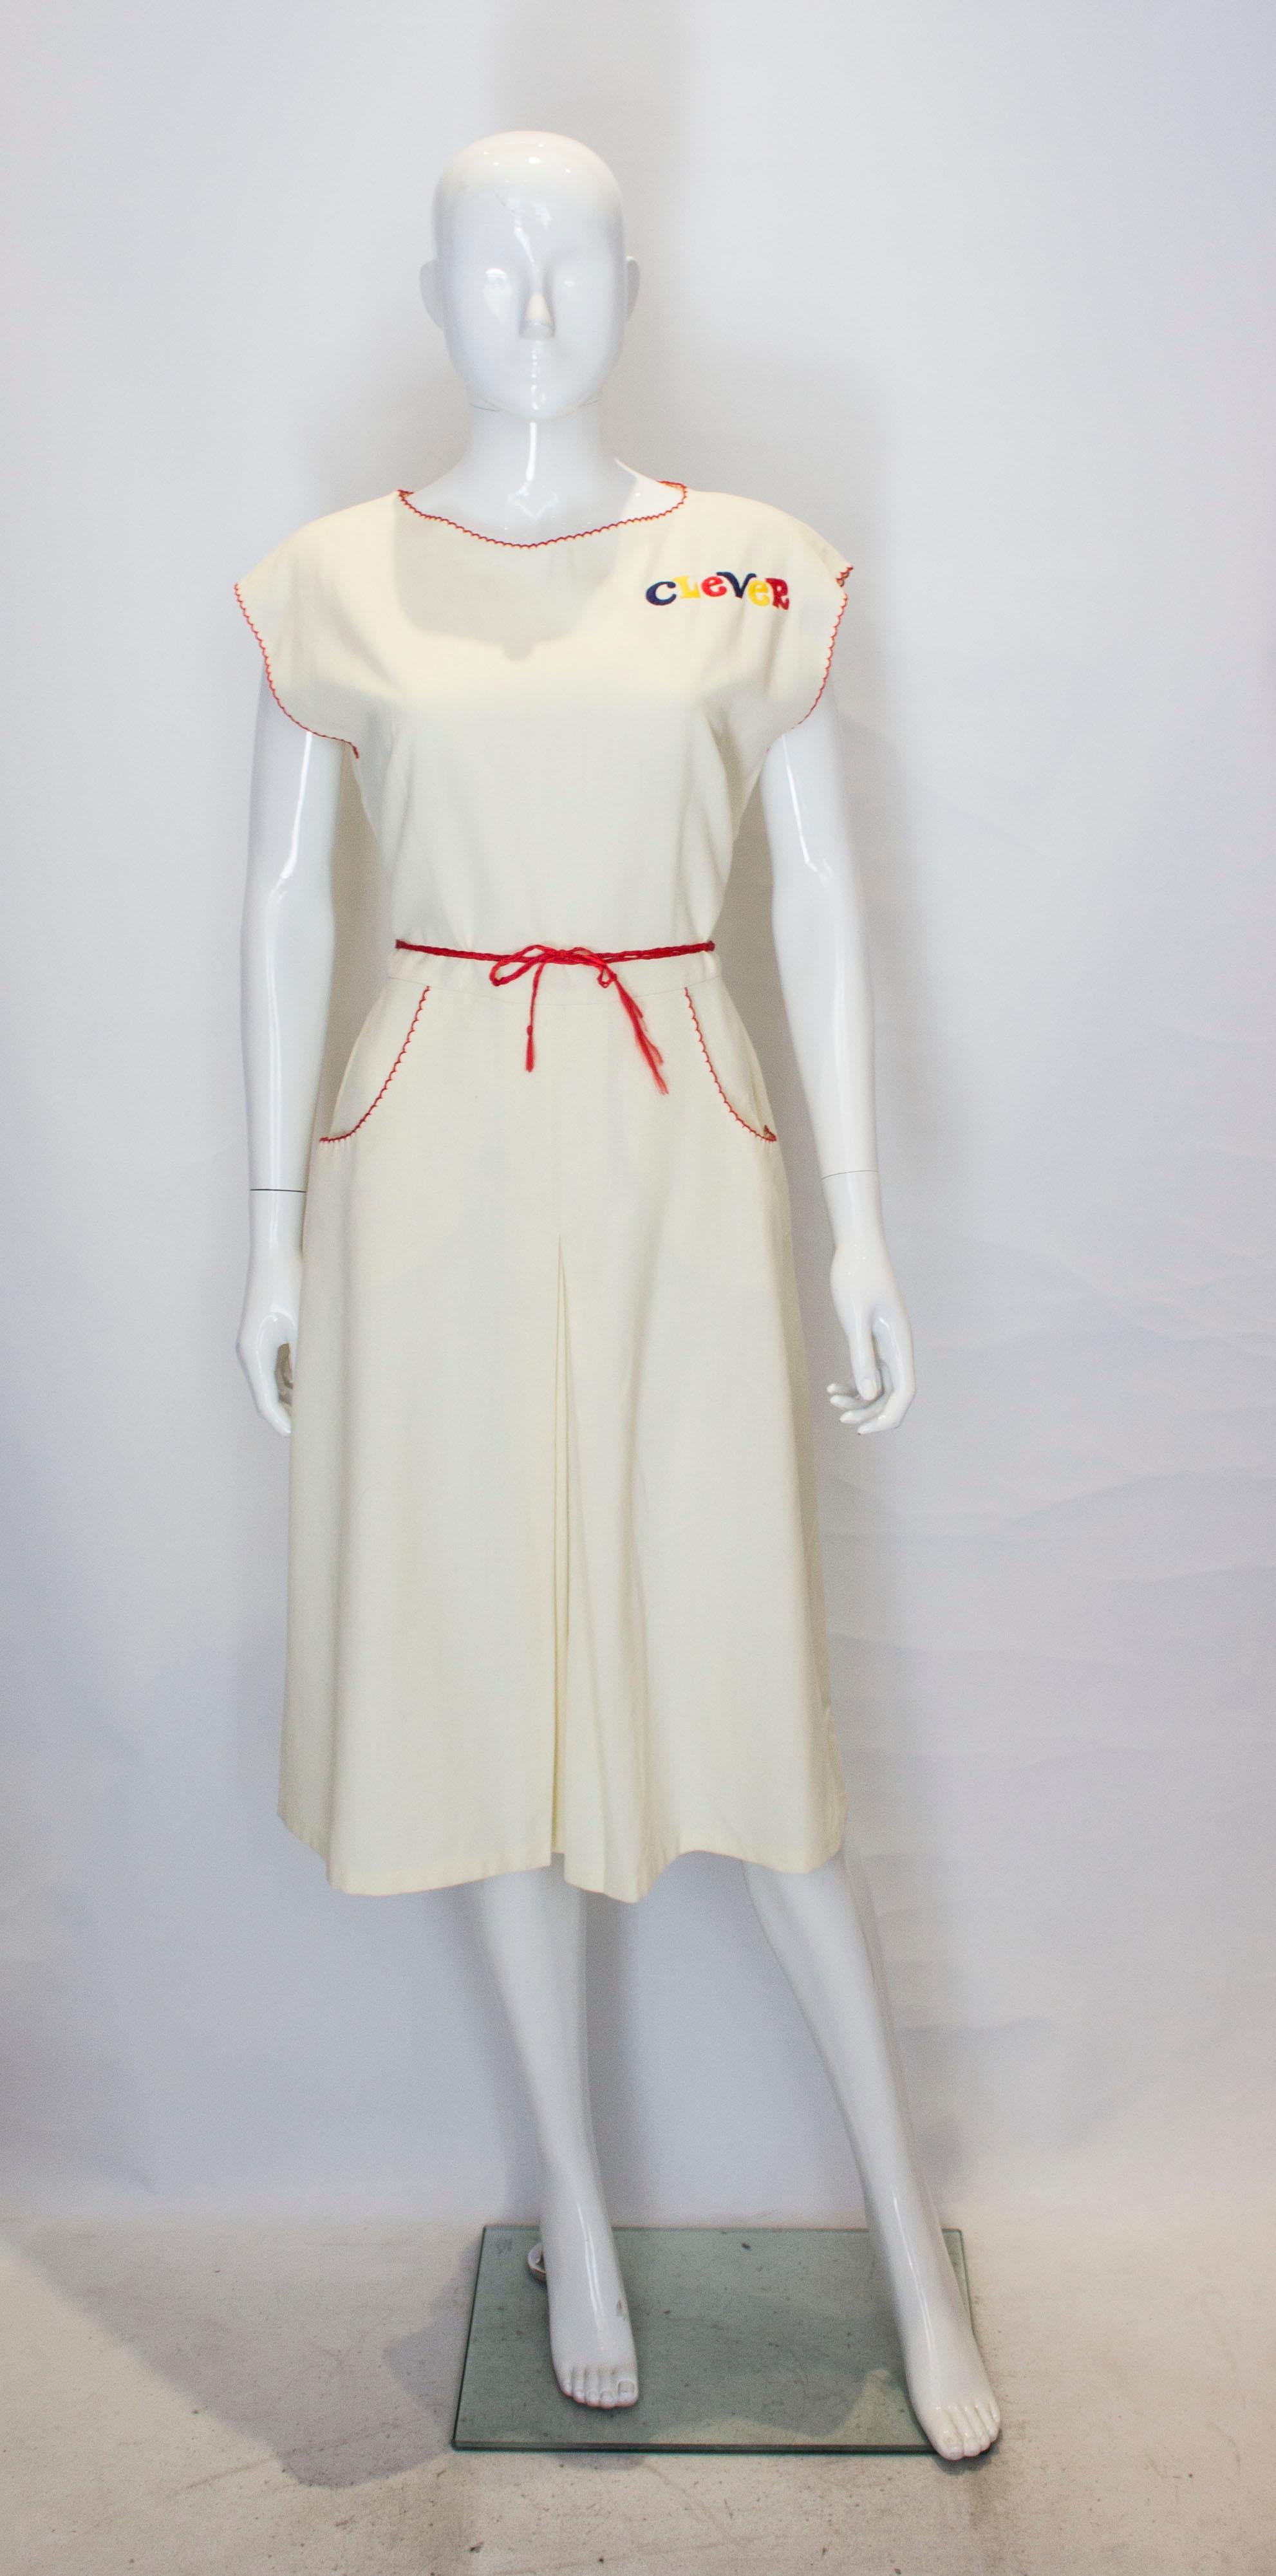 A fun vintage novelty dress with the word 'Clever' embroidered on the top left.  In an ivory fabric edged in red, the dress has a flared skirt with front  central  pleat , two front pockets, central back zip and a red rope belt.